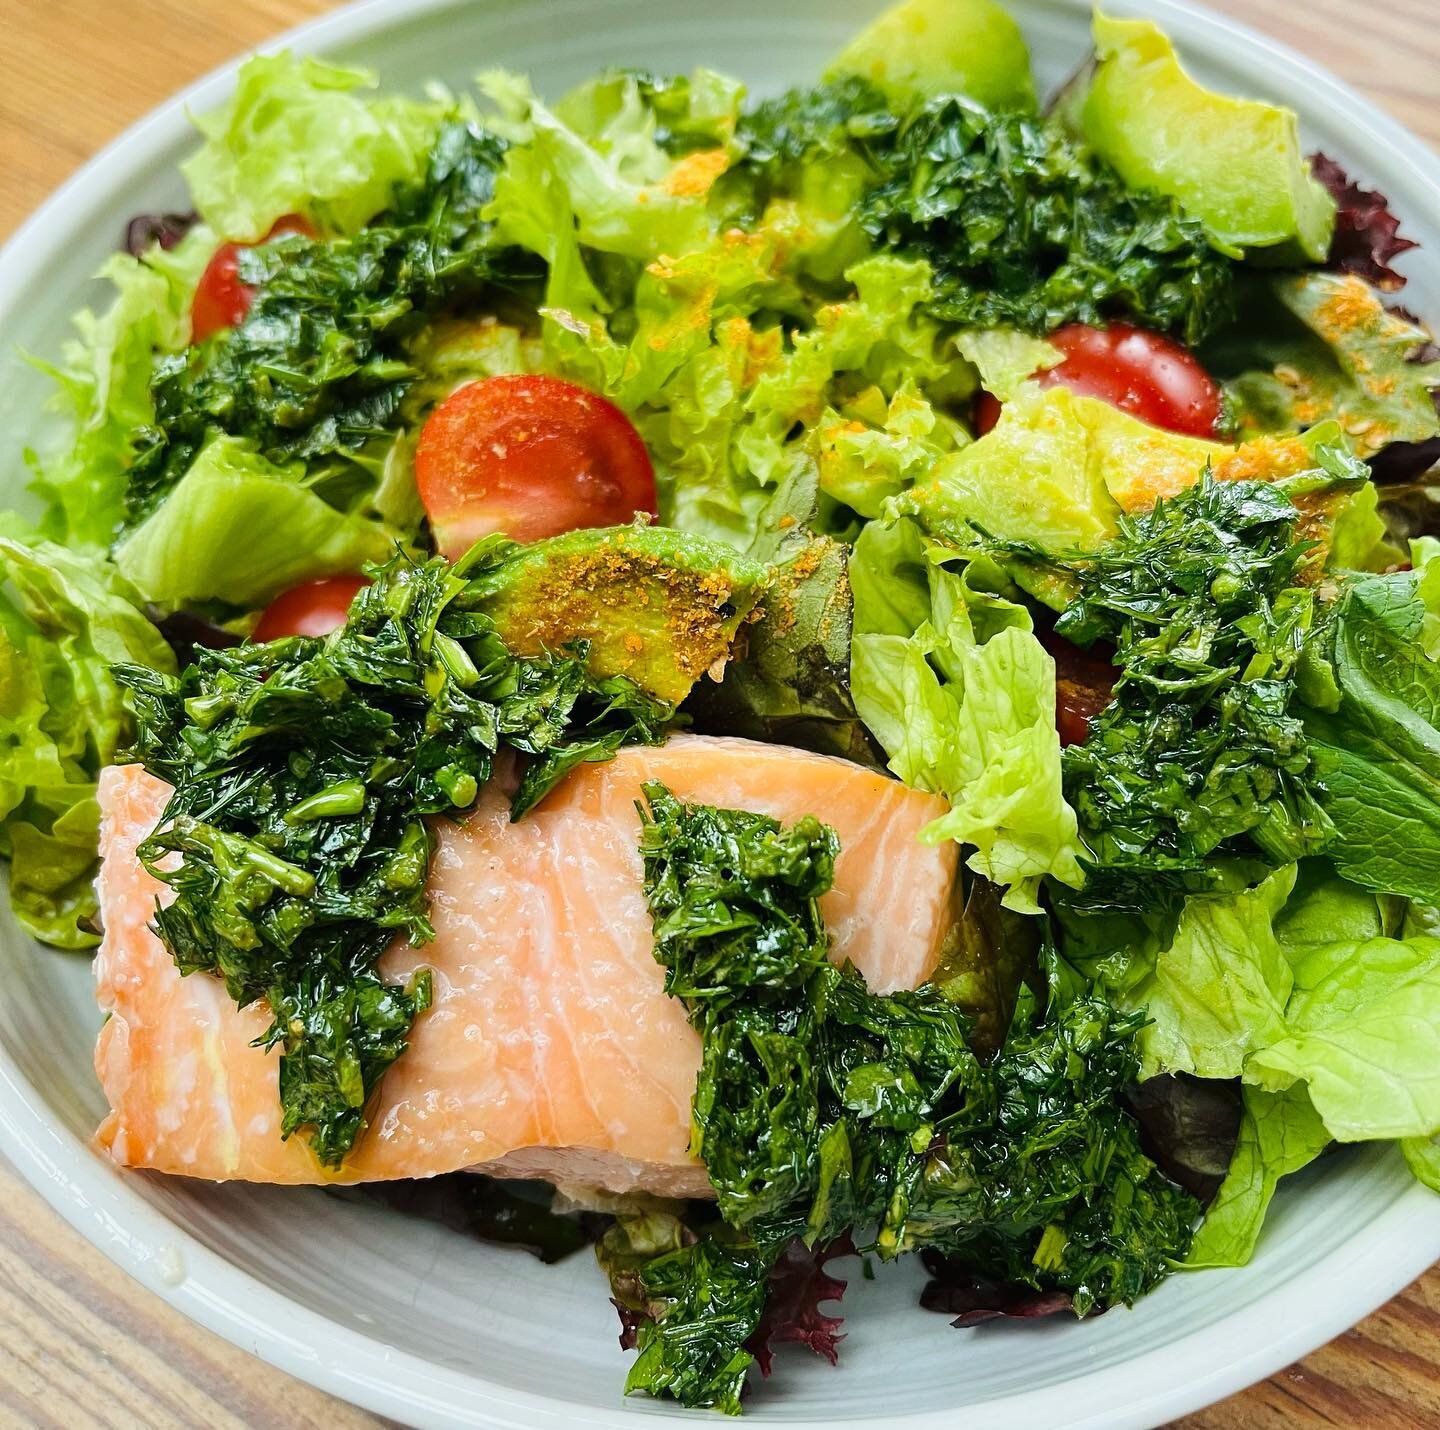 Got a bunch of herbs needs using up? Don&rsquo;t let them languish, make a game changer dressing&hellip;
-Lunch today was a simple leafy green salad with tomato, avocado, leftover quinoa from a pack, and cold poached salmon.
Dressing: big bunch of fi